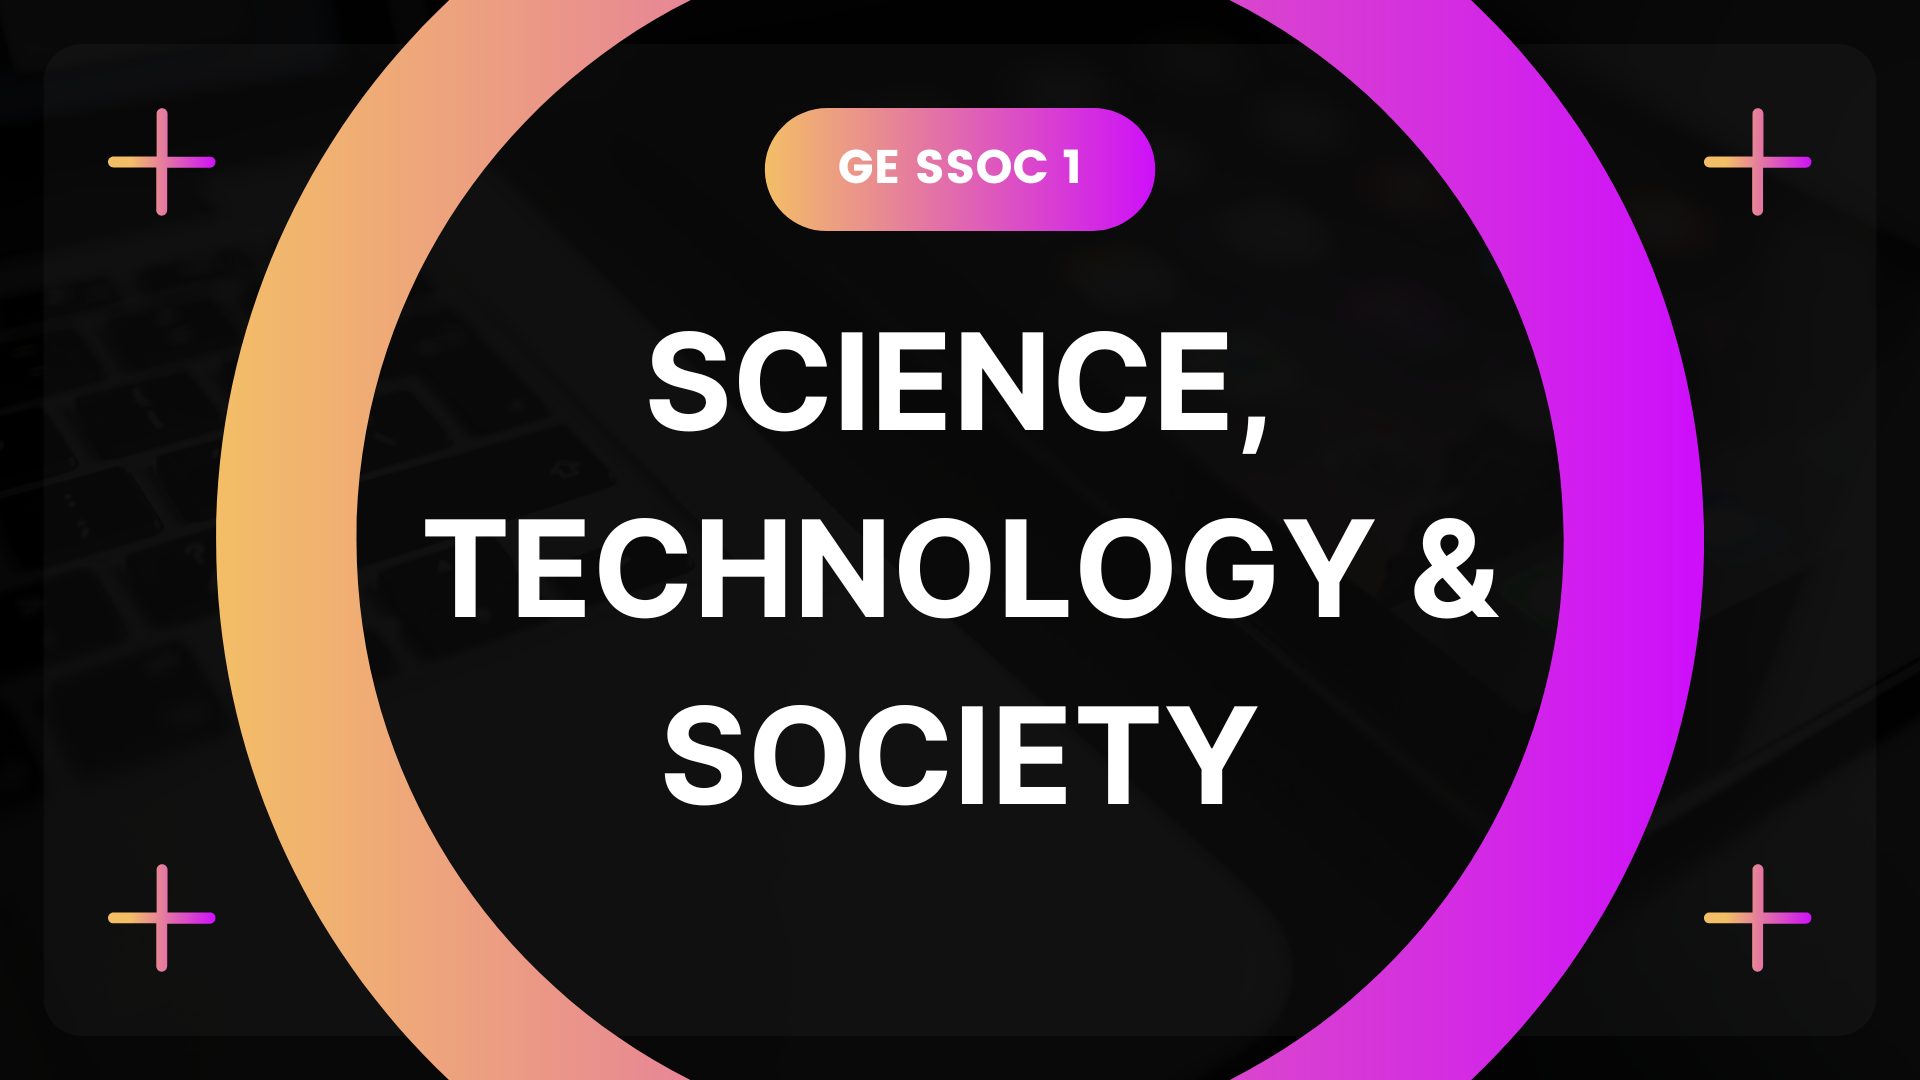 GE SSOC - Science, Technology and Society